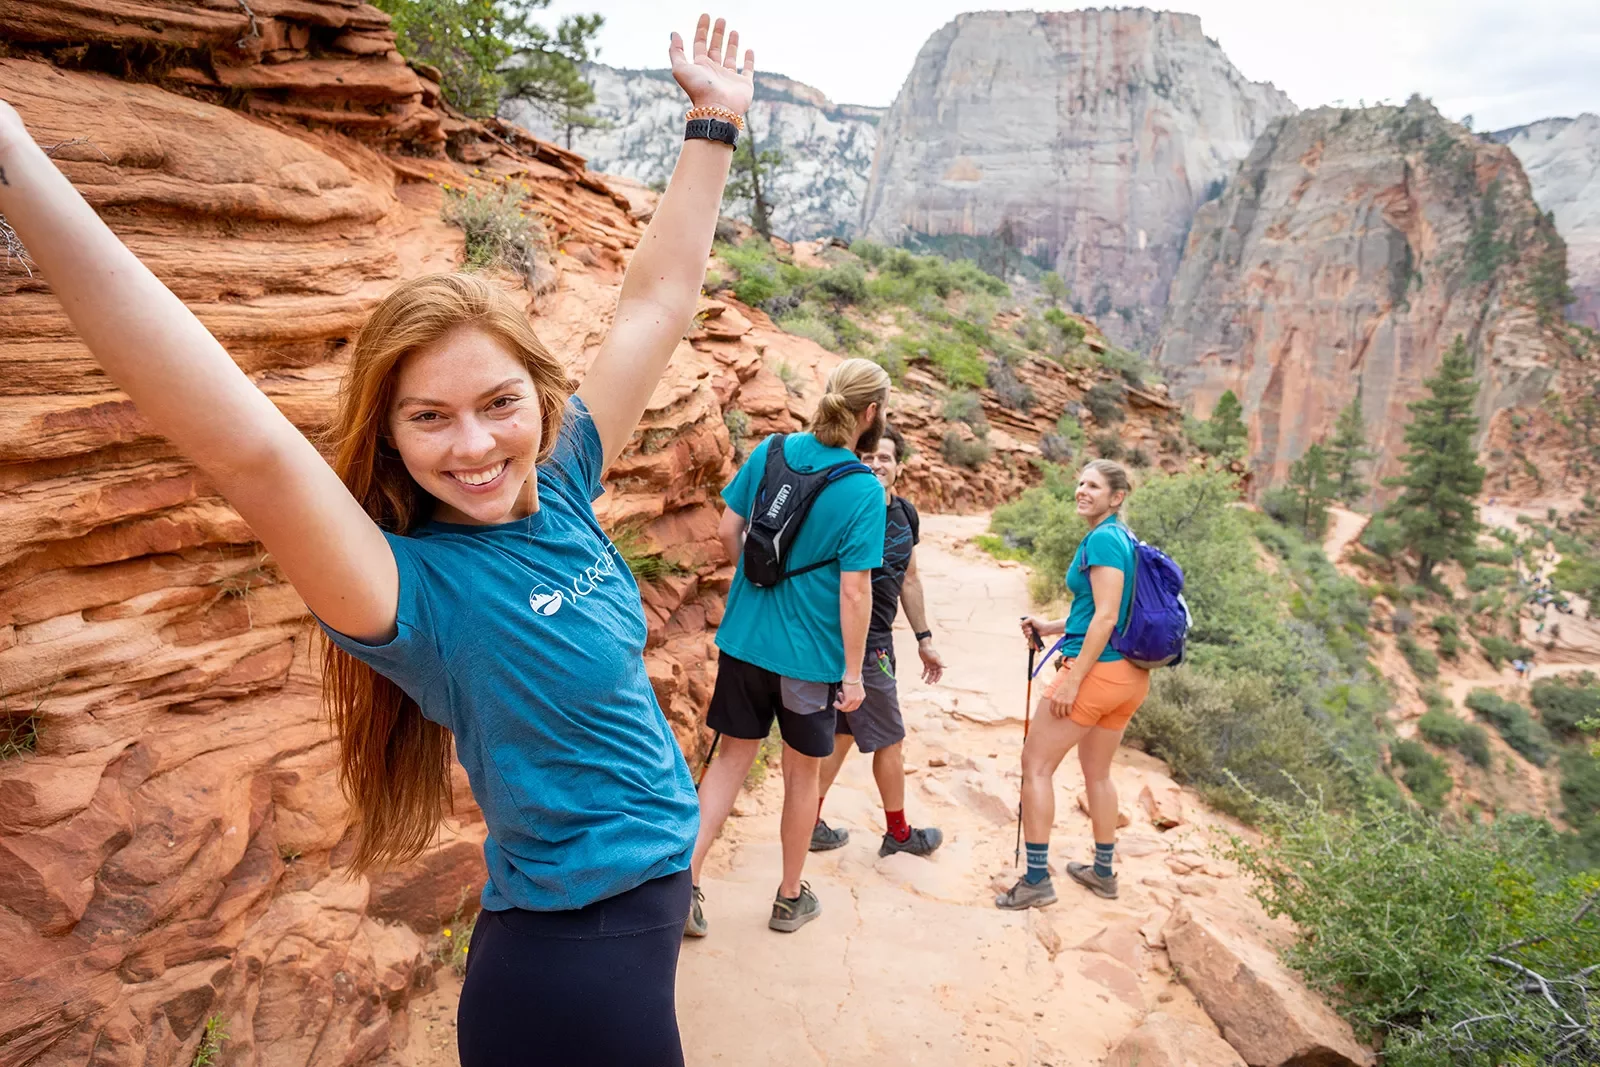 Redhead model with arms up behind guests in Zion